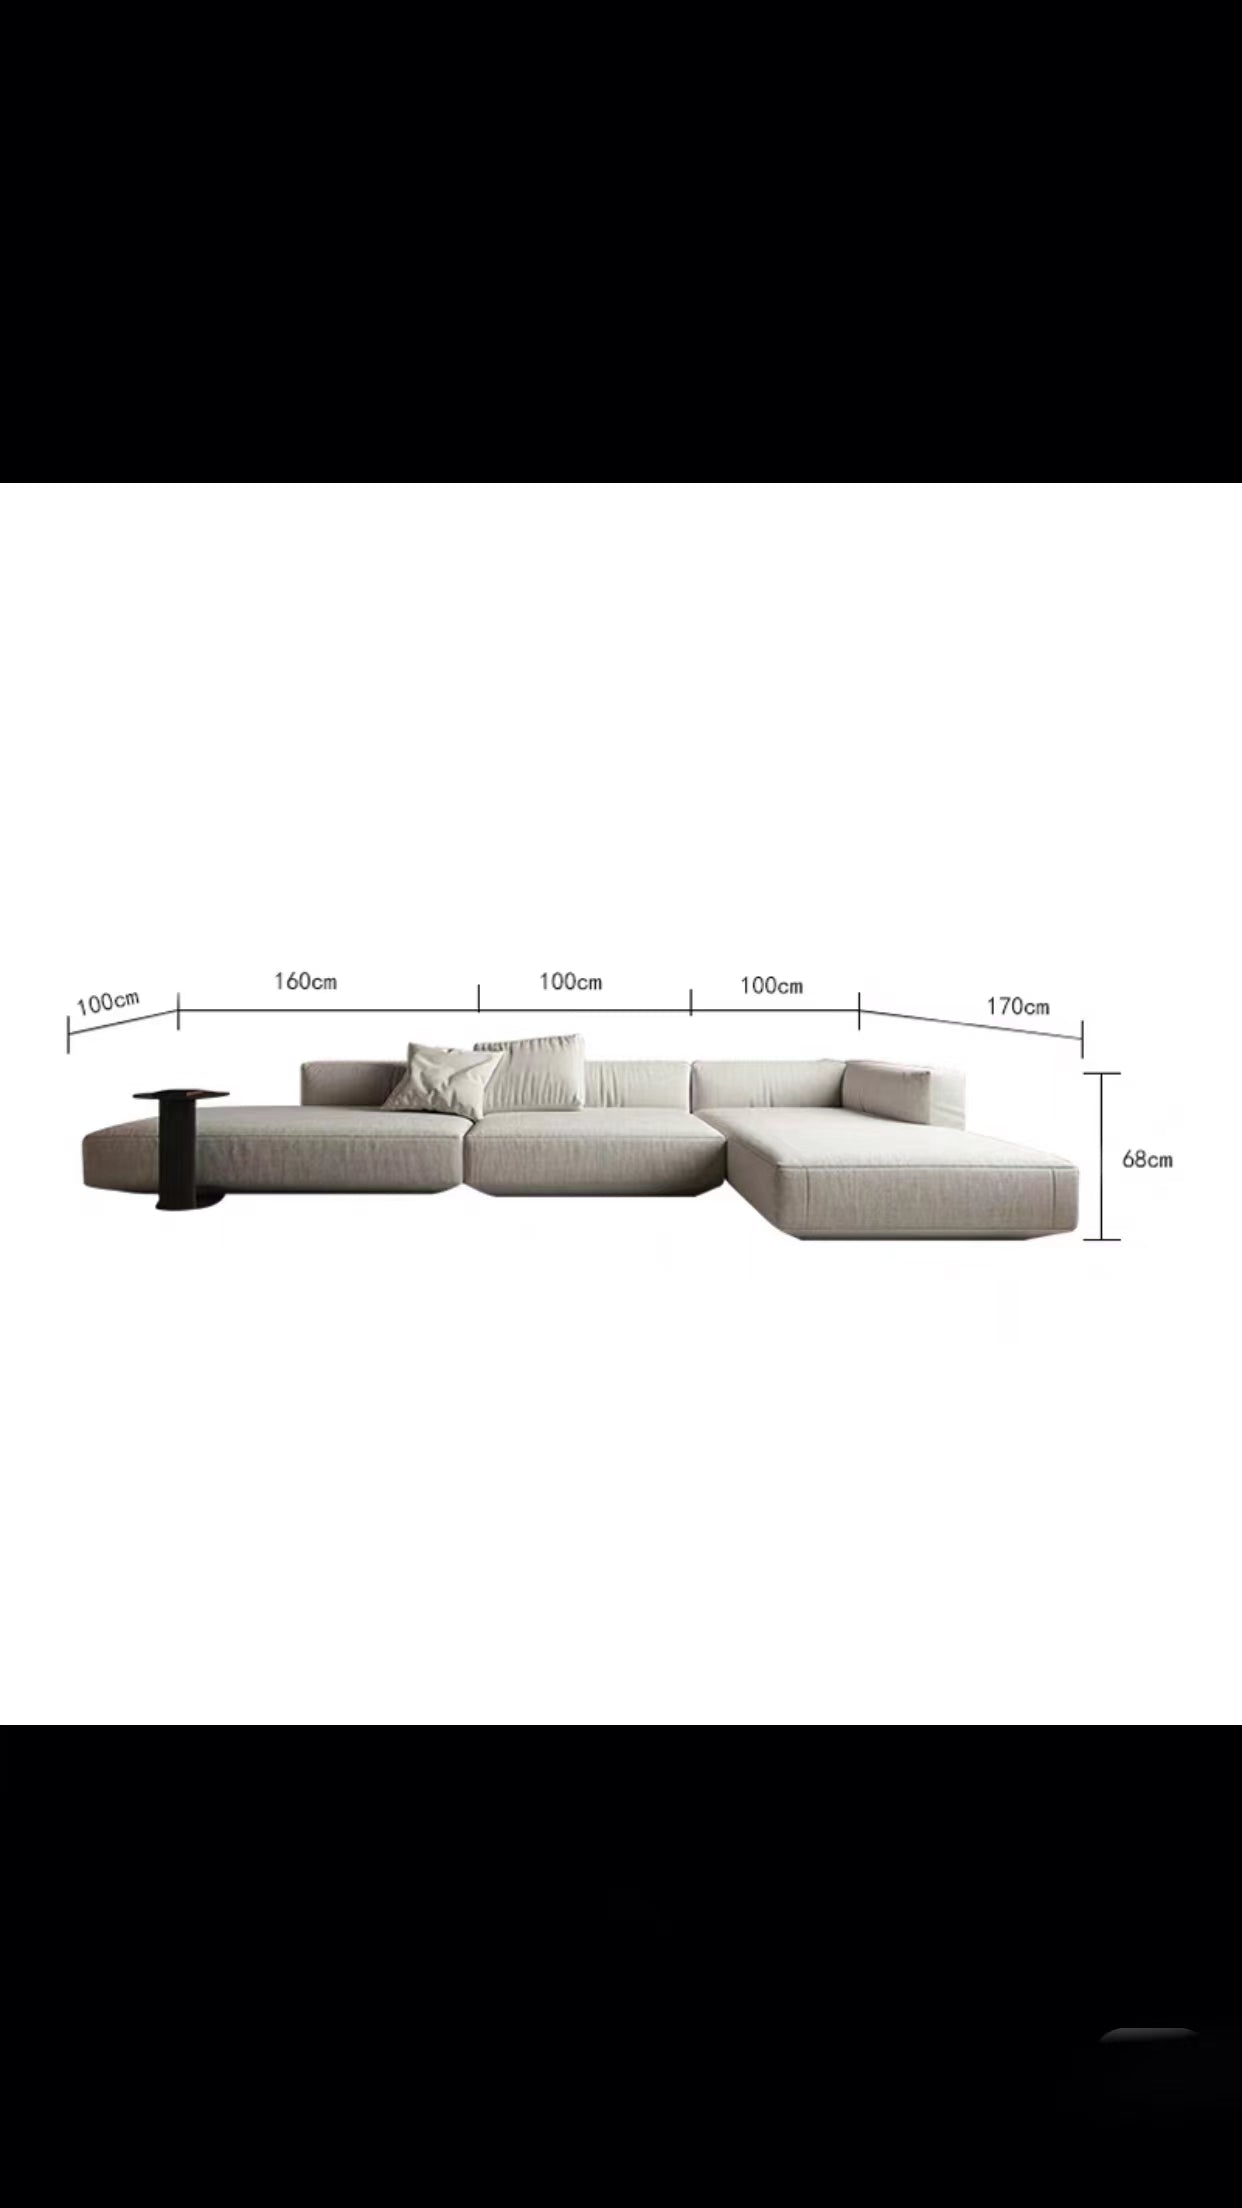 Ambriana 3 Piece Upholstered Sectional Sofa - 4 Seasons Home Gadgets